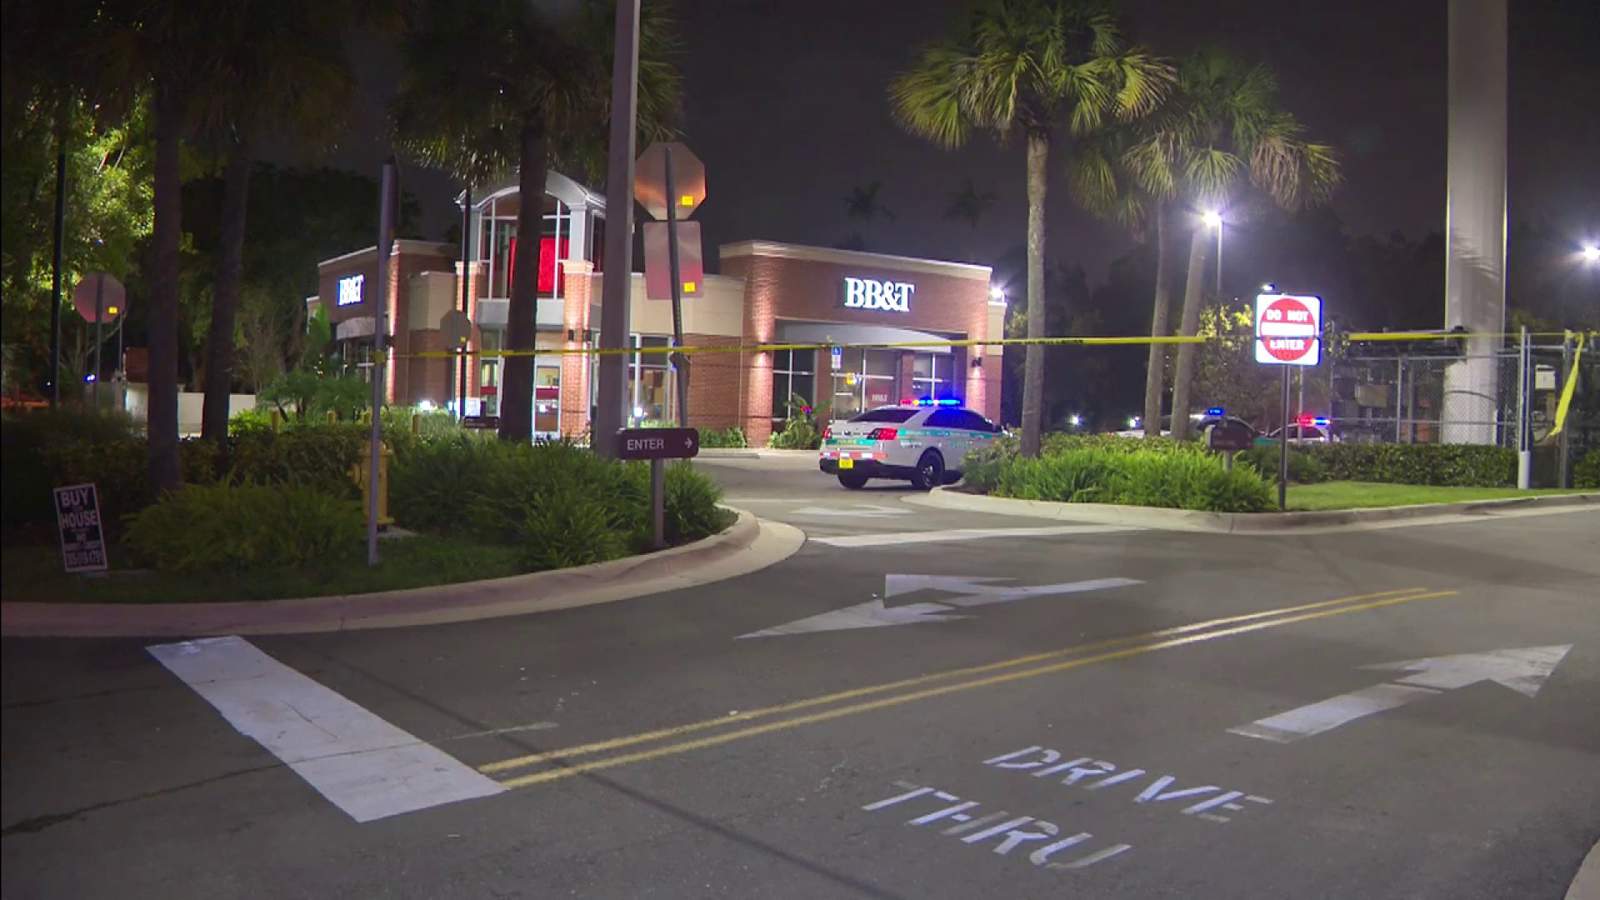 Police: Man shoots, kills person who approached him at BB&T bank ATM in Kendall